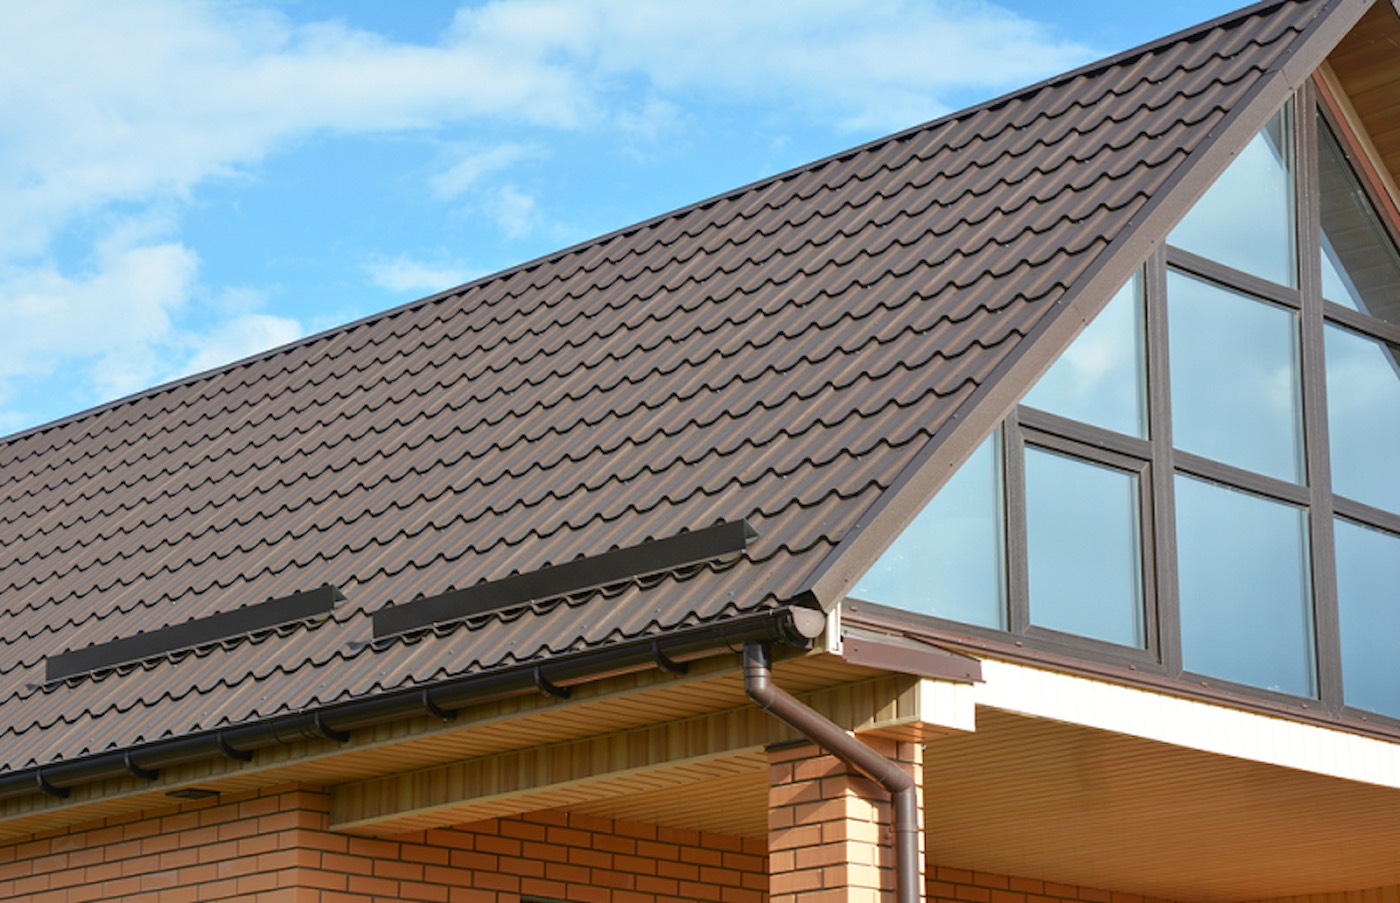 What Is The Importance Of Metal Roofing In The Construction Of Building?